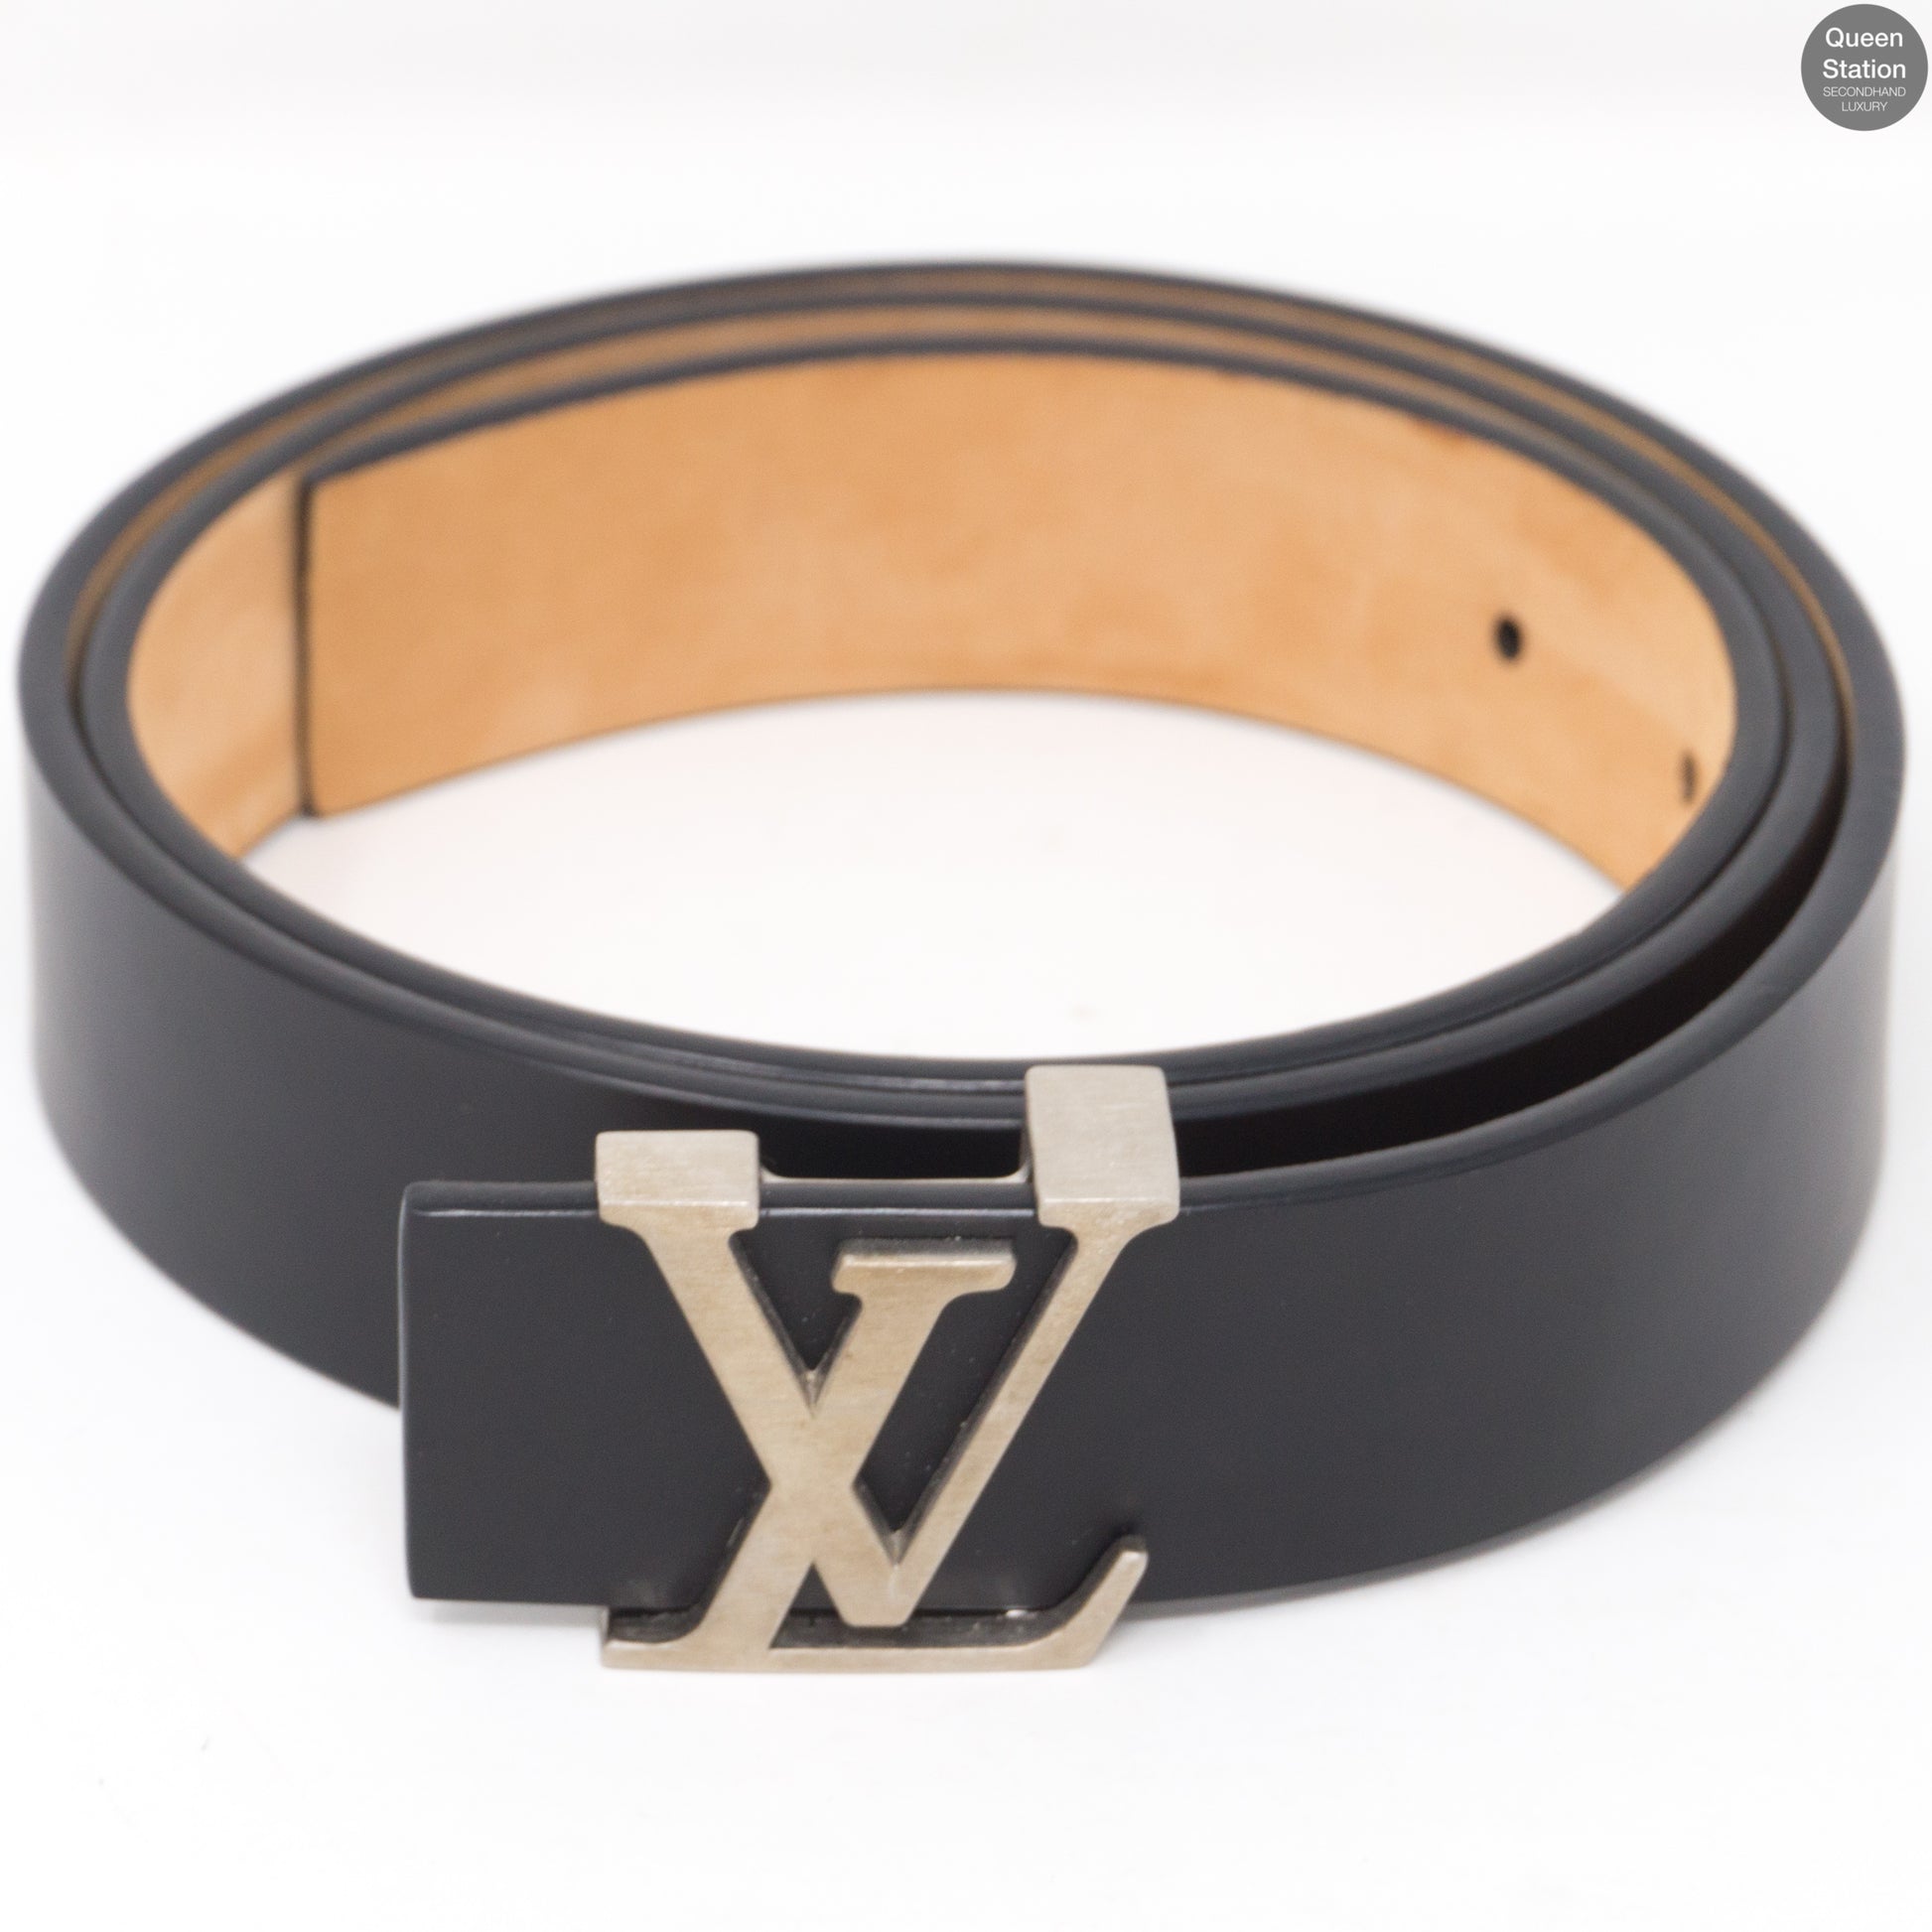 Initiales leather belt Louis Vuitton Black size 85 cm in Leather - 36019900